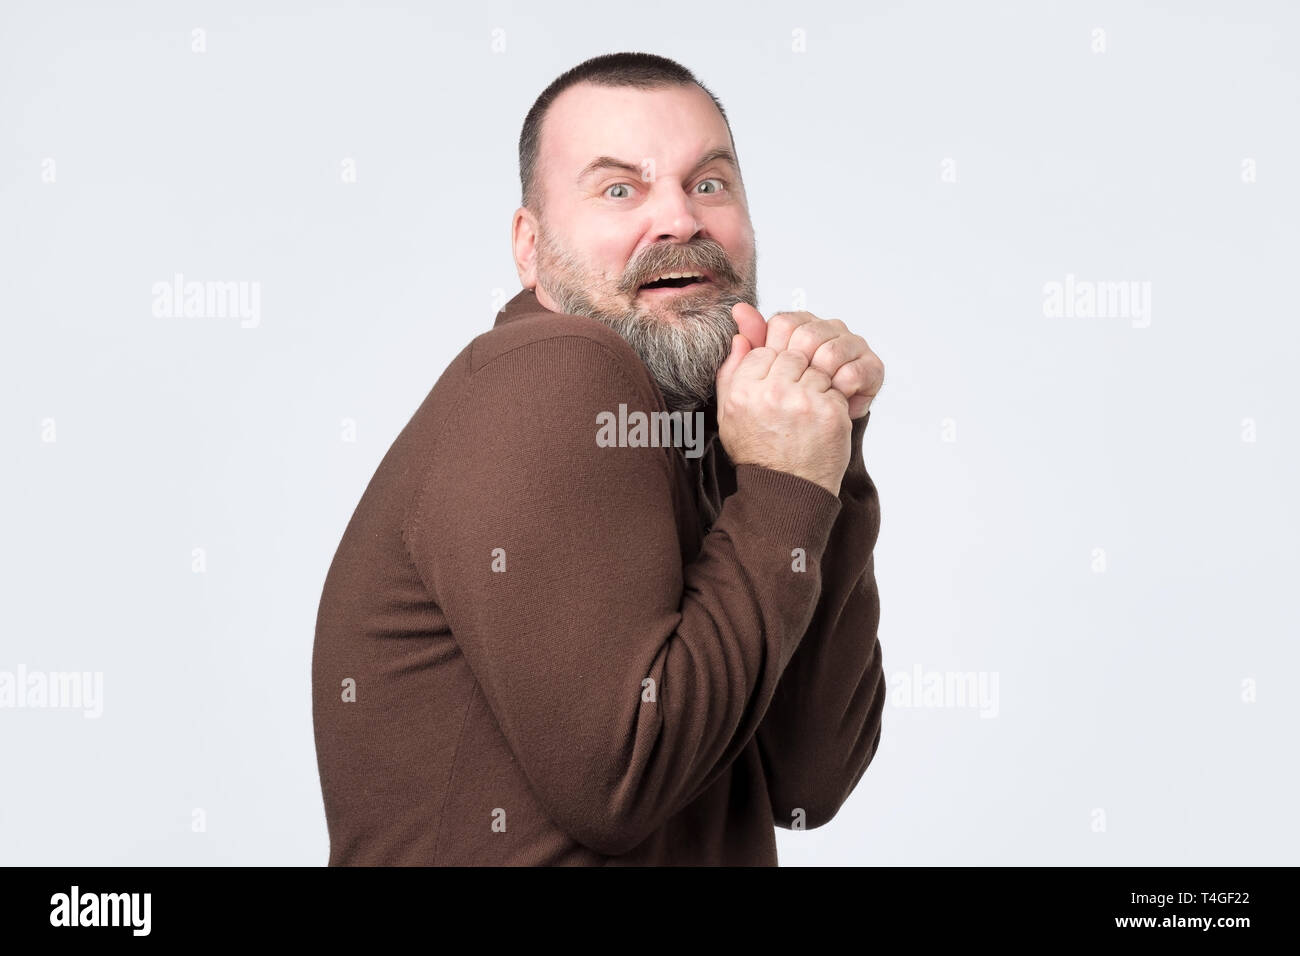 Frightened mature man in an exaggerated expression of fear. Negative facial emotion Stock Photo